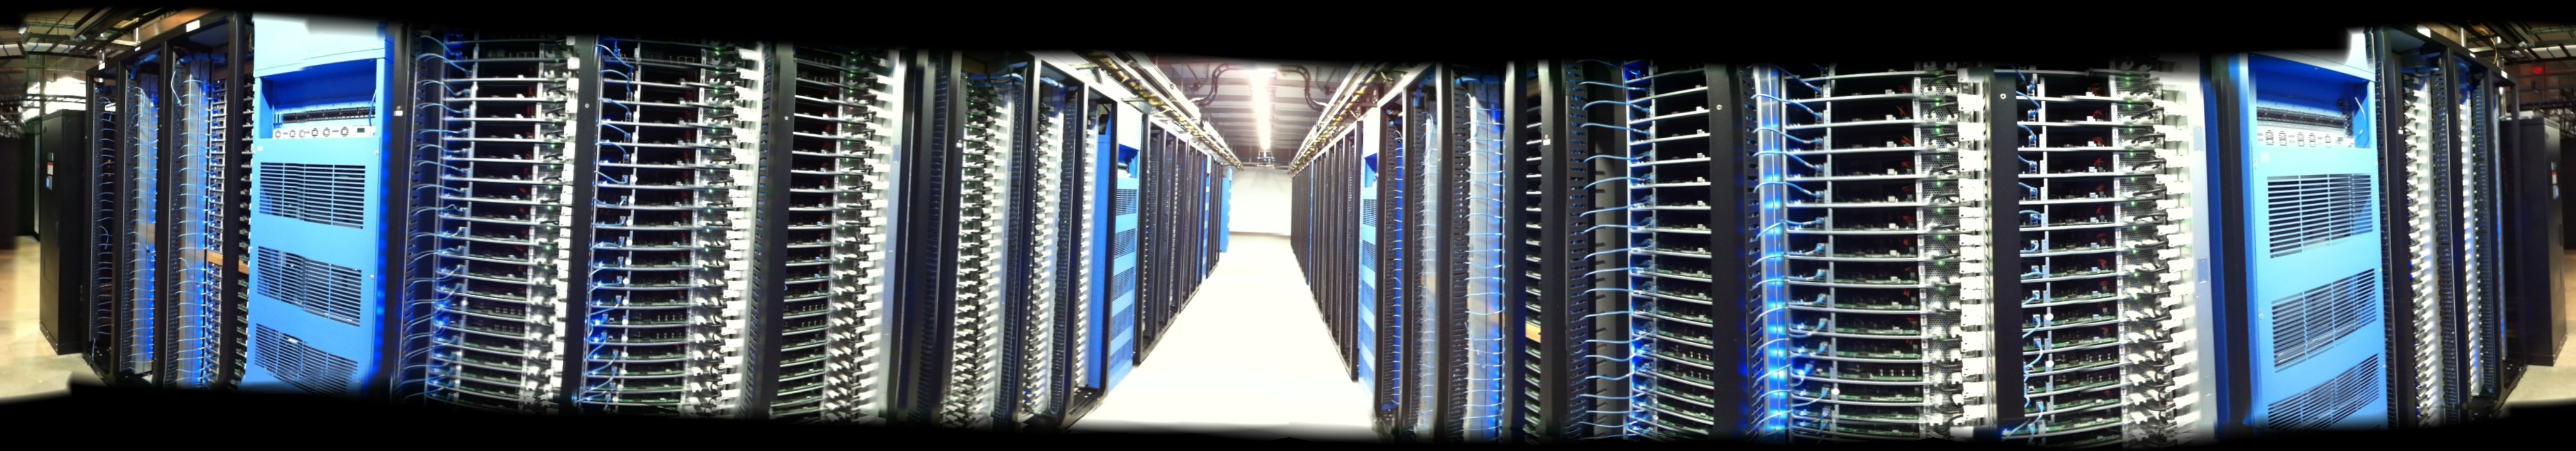 Panoramic Photo of one of the rows of servers inside Facebook's new datacenter